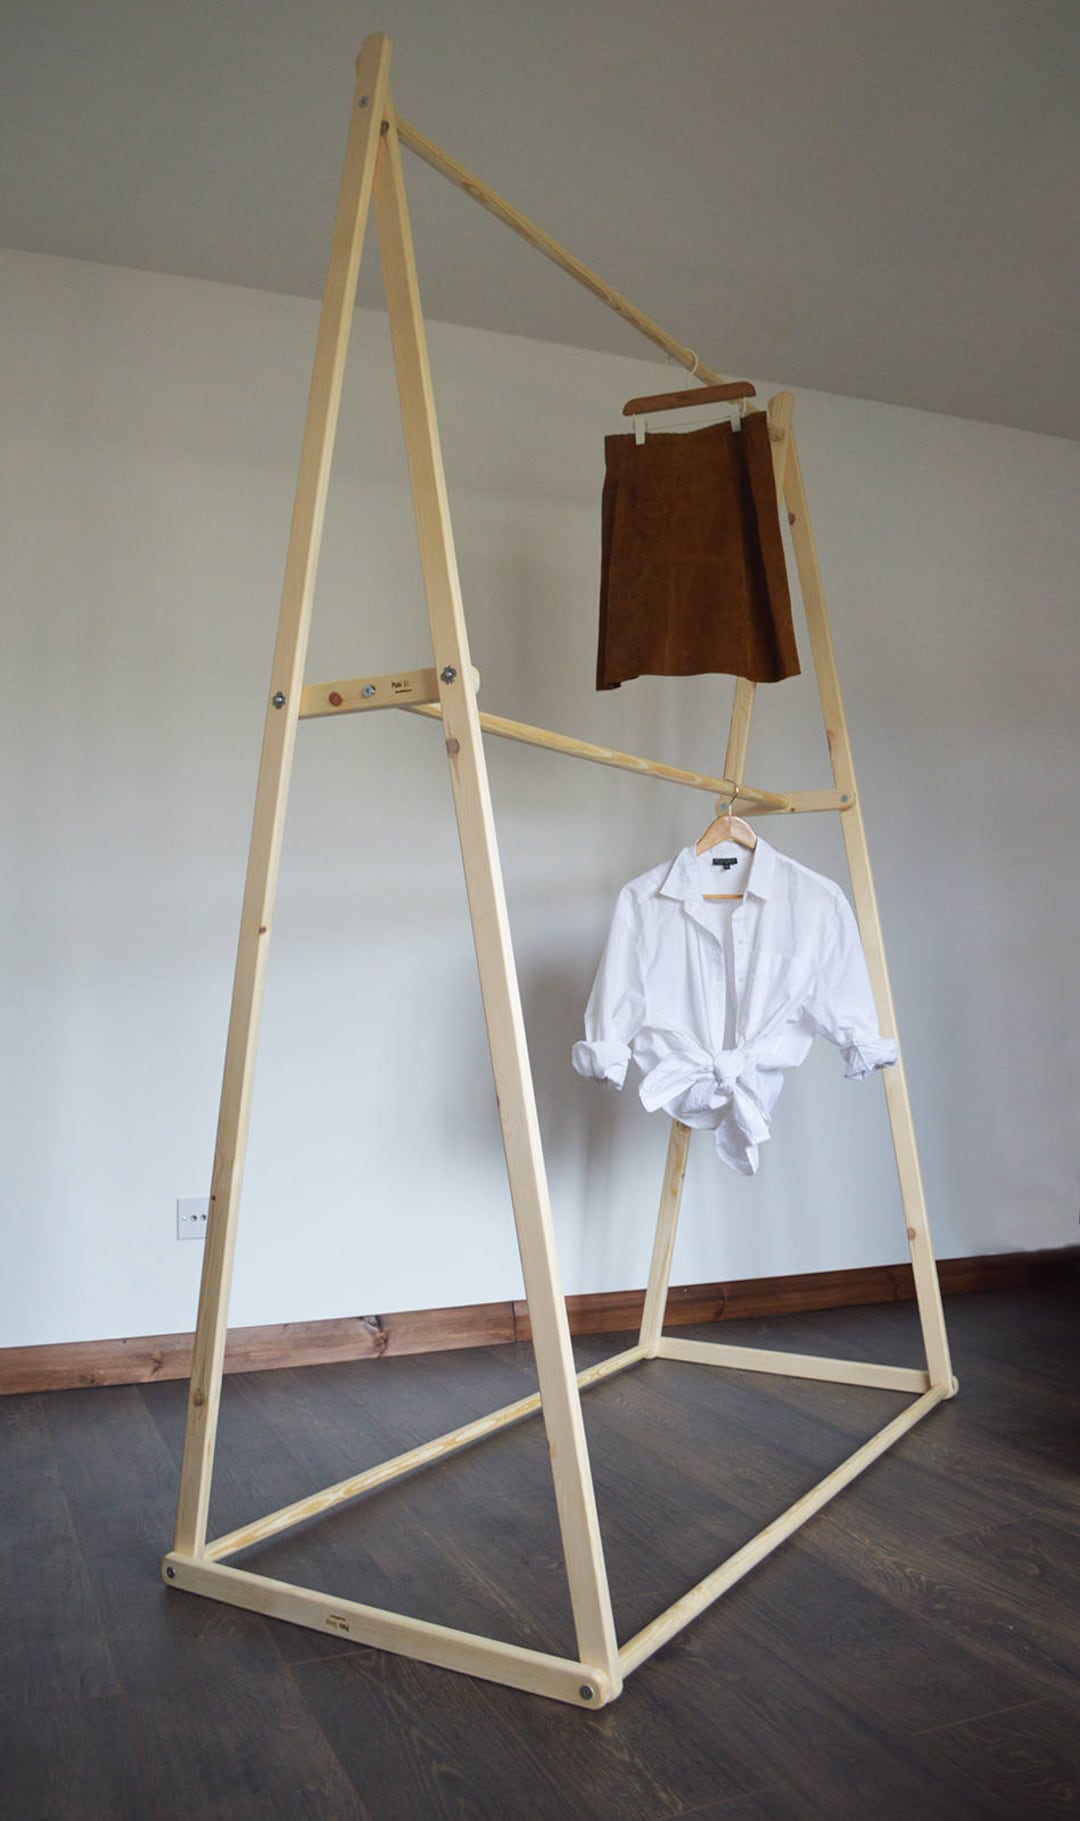 Handmade Natural Wood Double Hanging Space Clothes Rack - Etsy